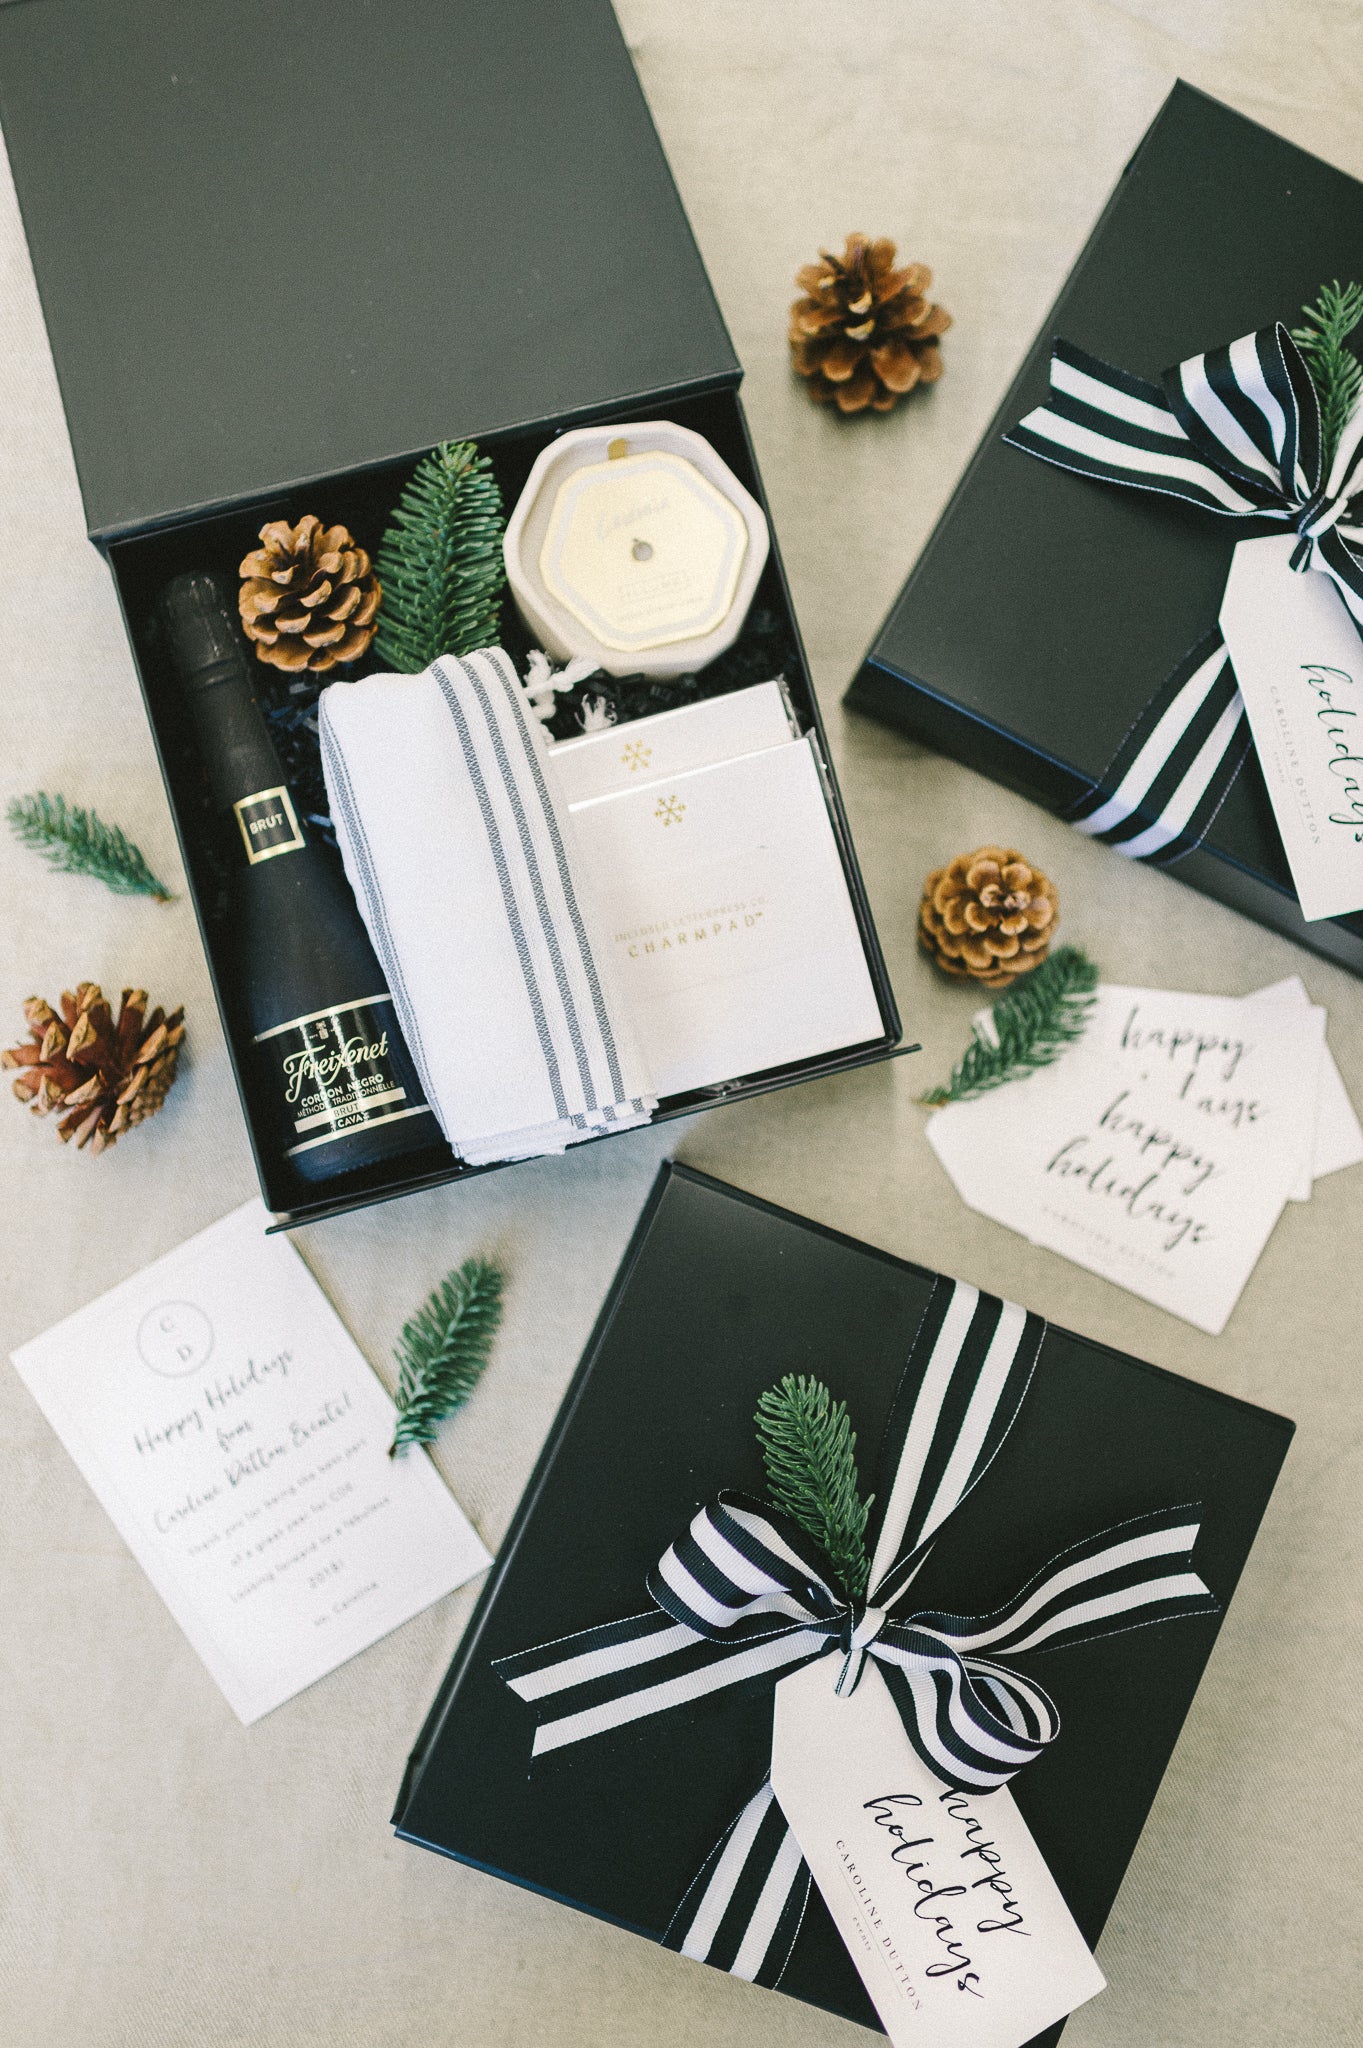 5 Things to Decide Before Outsourcing Your Client Gifts